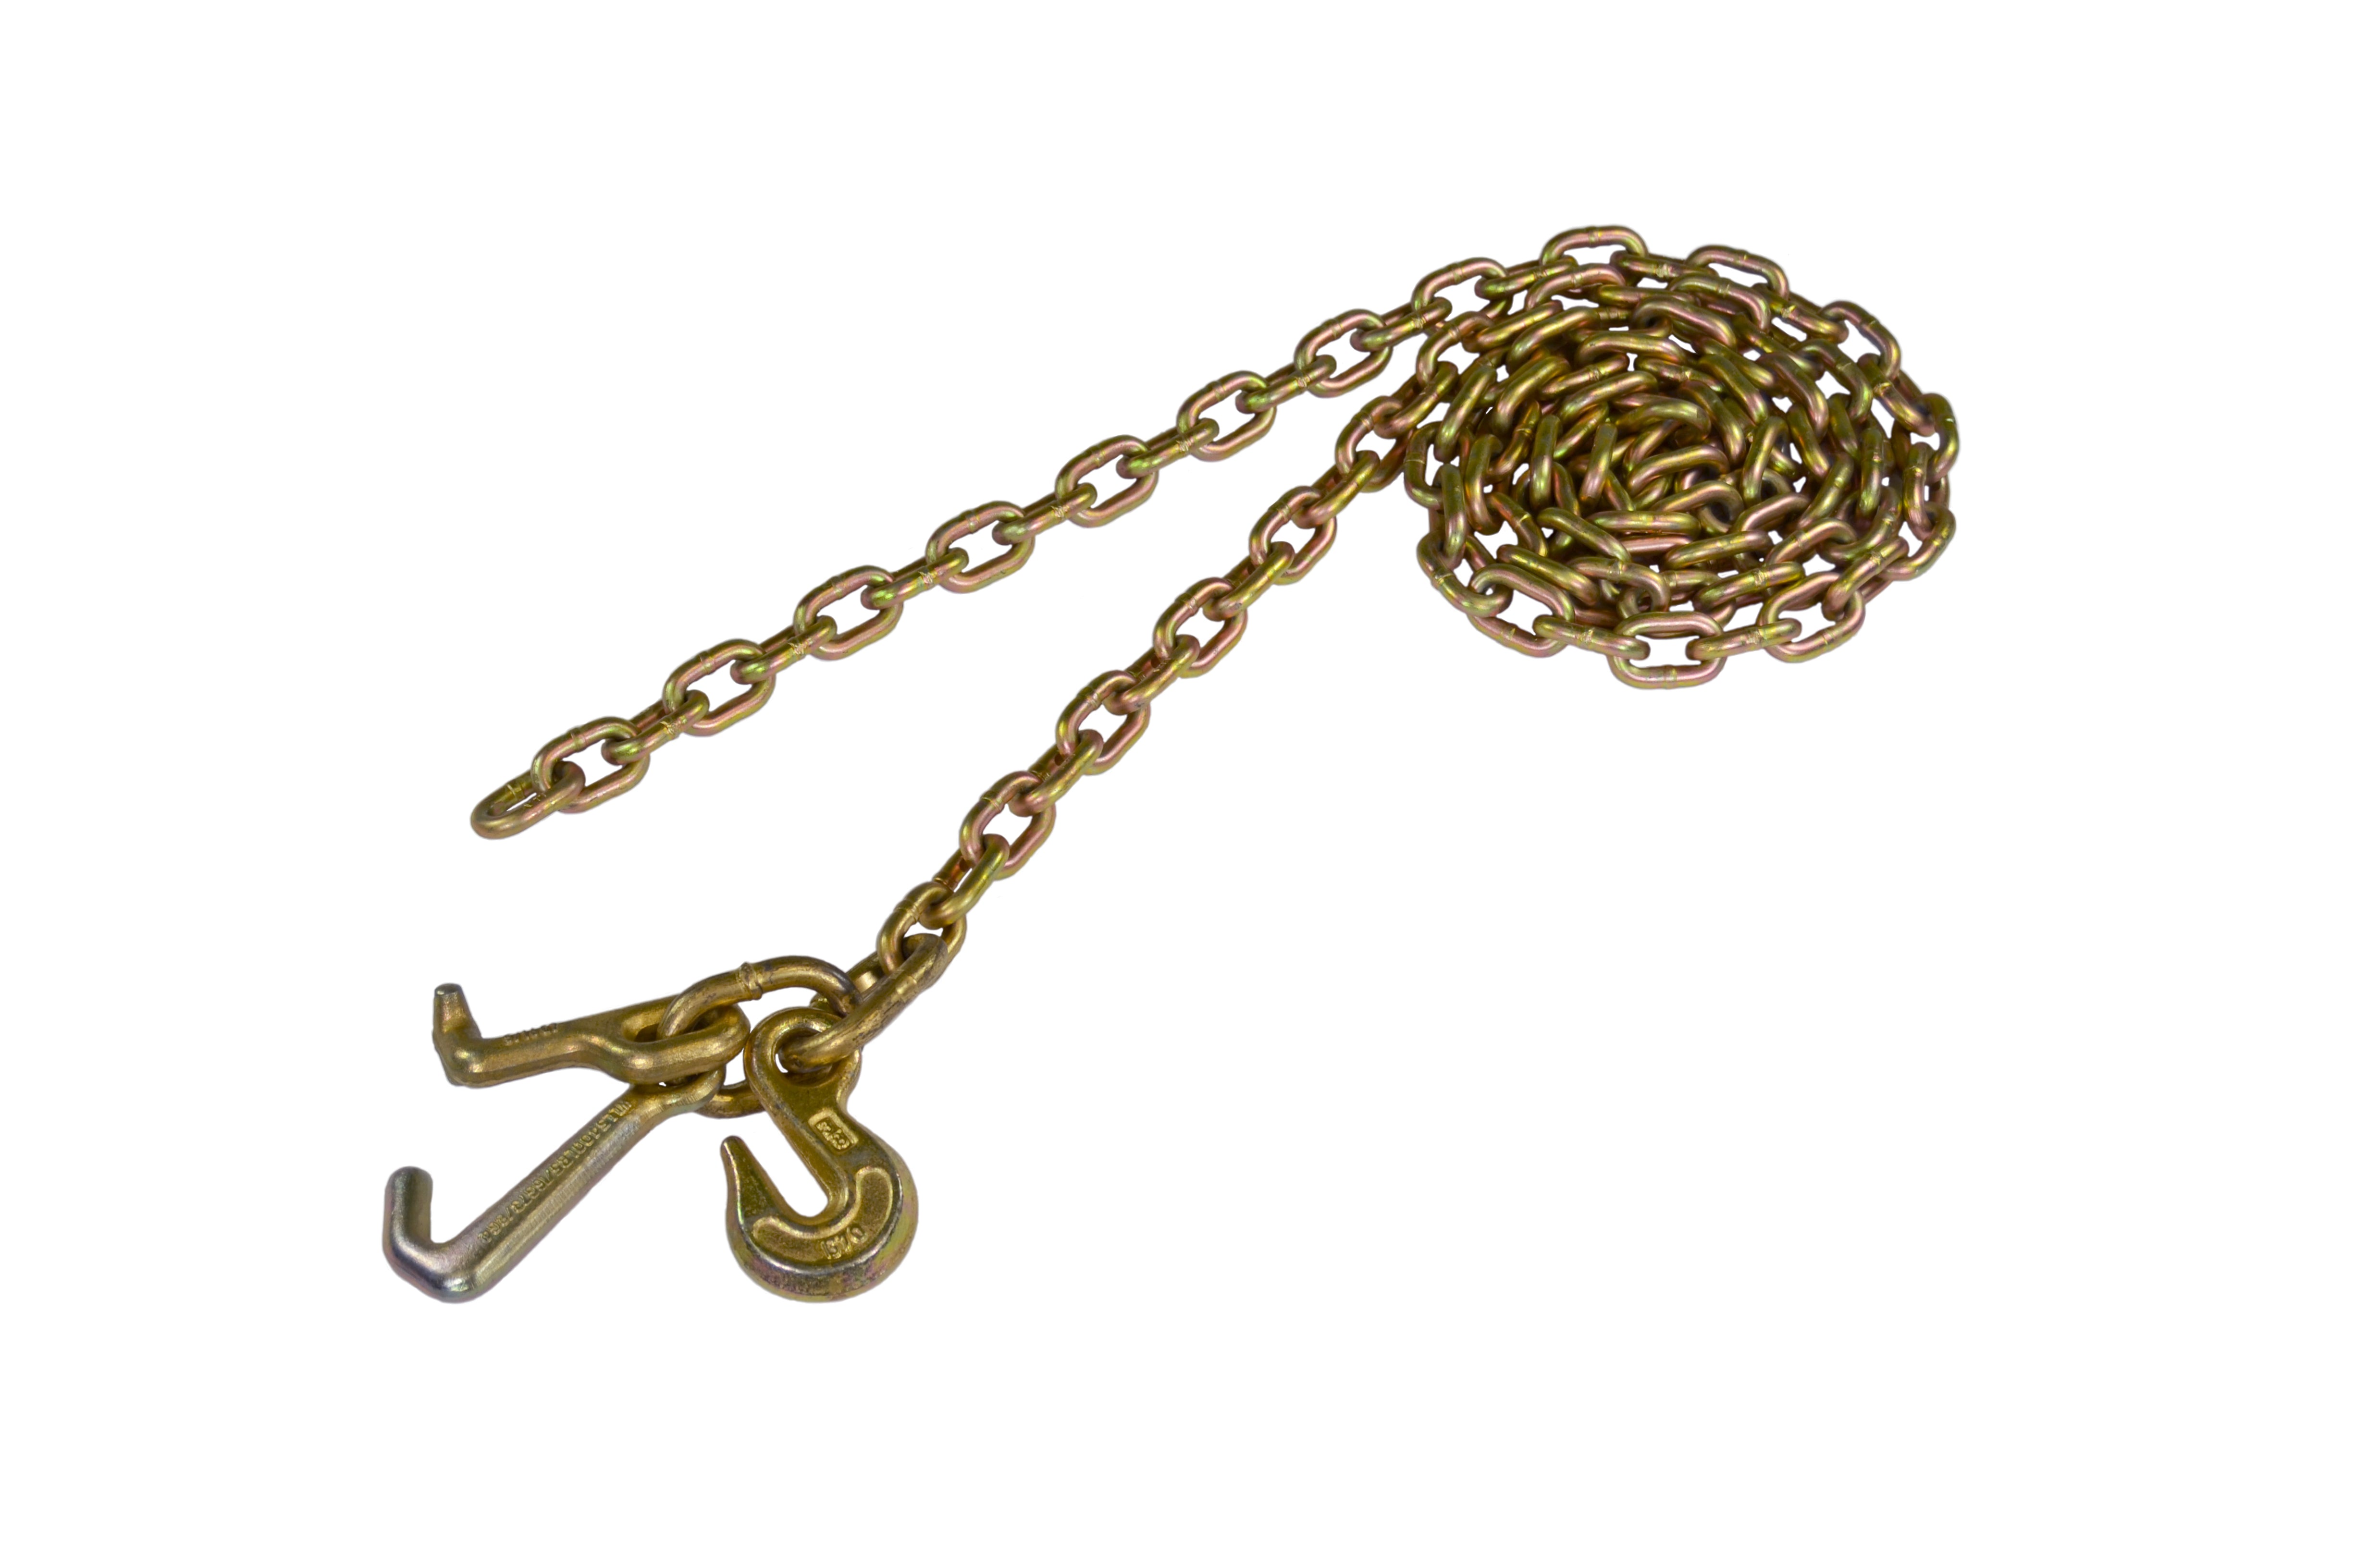 Creationstry Tow Chain with Forged J Hook and Grab Hook Safe